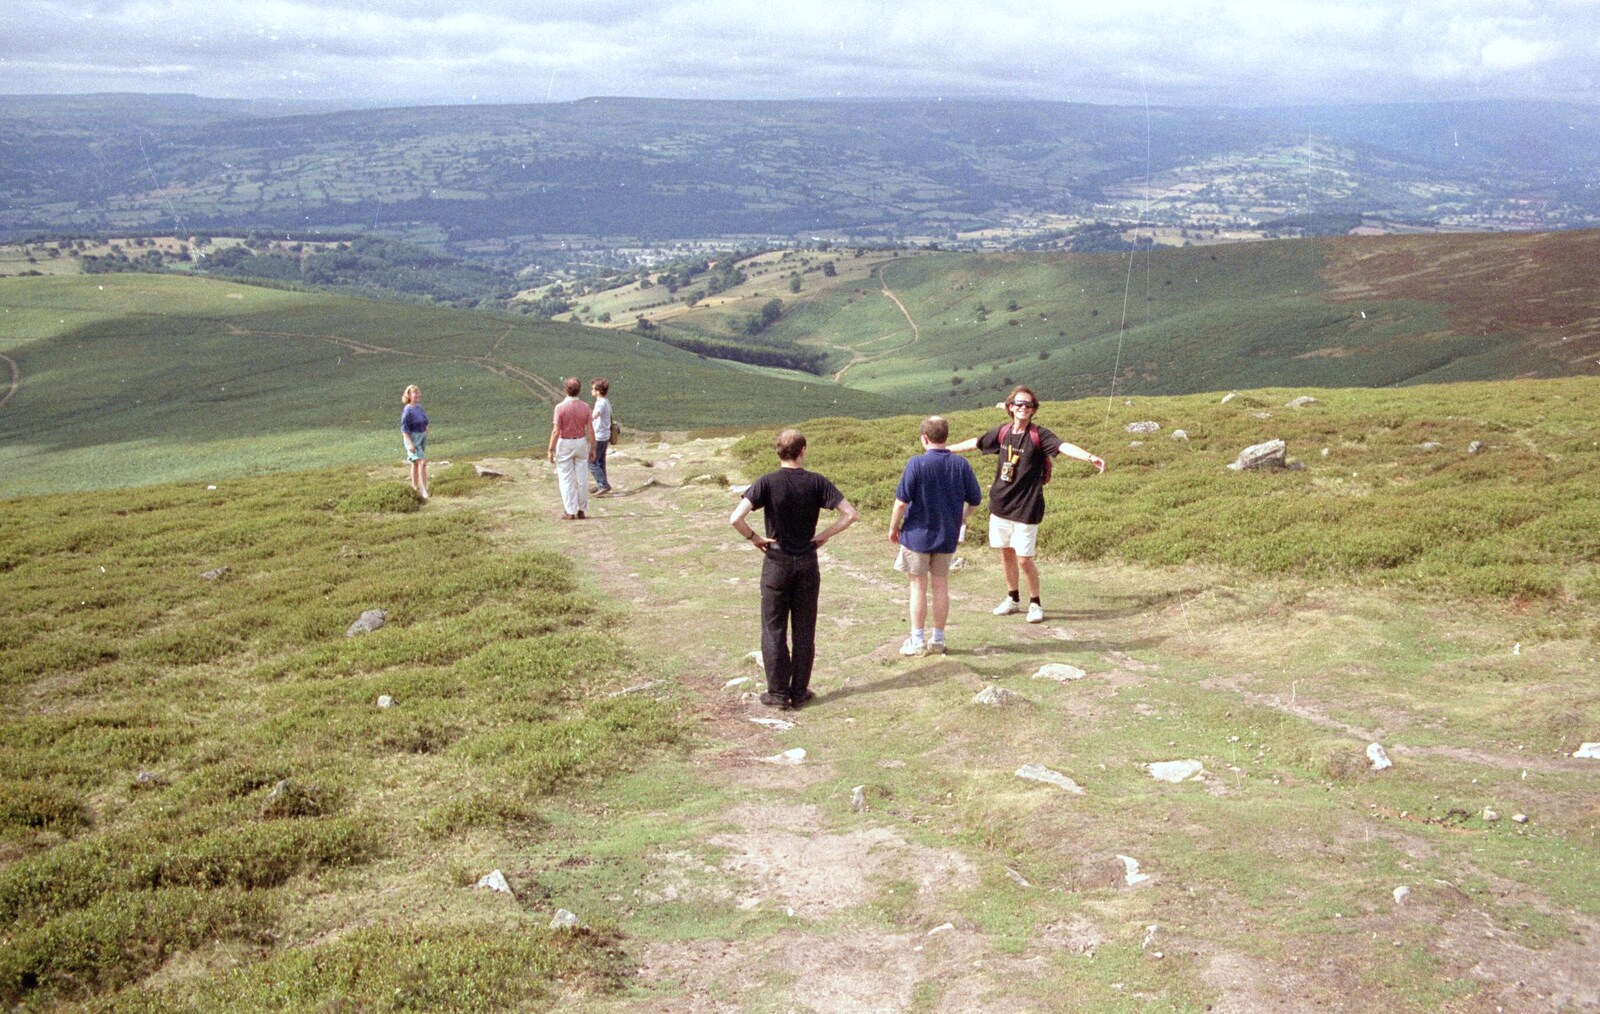 The view from up the hill from A Walk in the Brecon Beacons, Bannau Brycheiniog, Wales - 5th August 1990